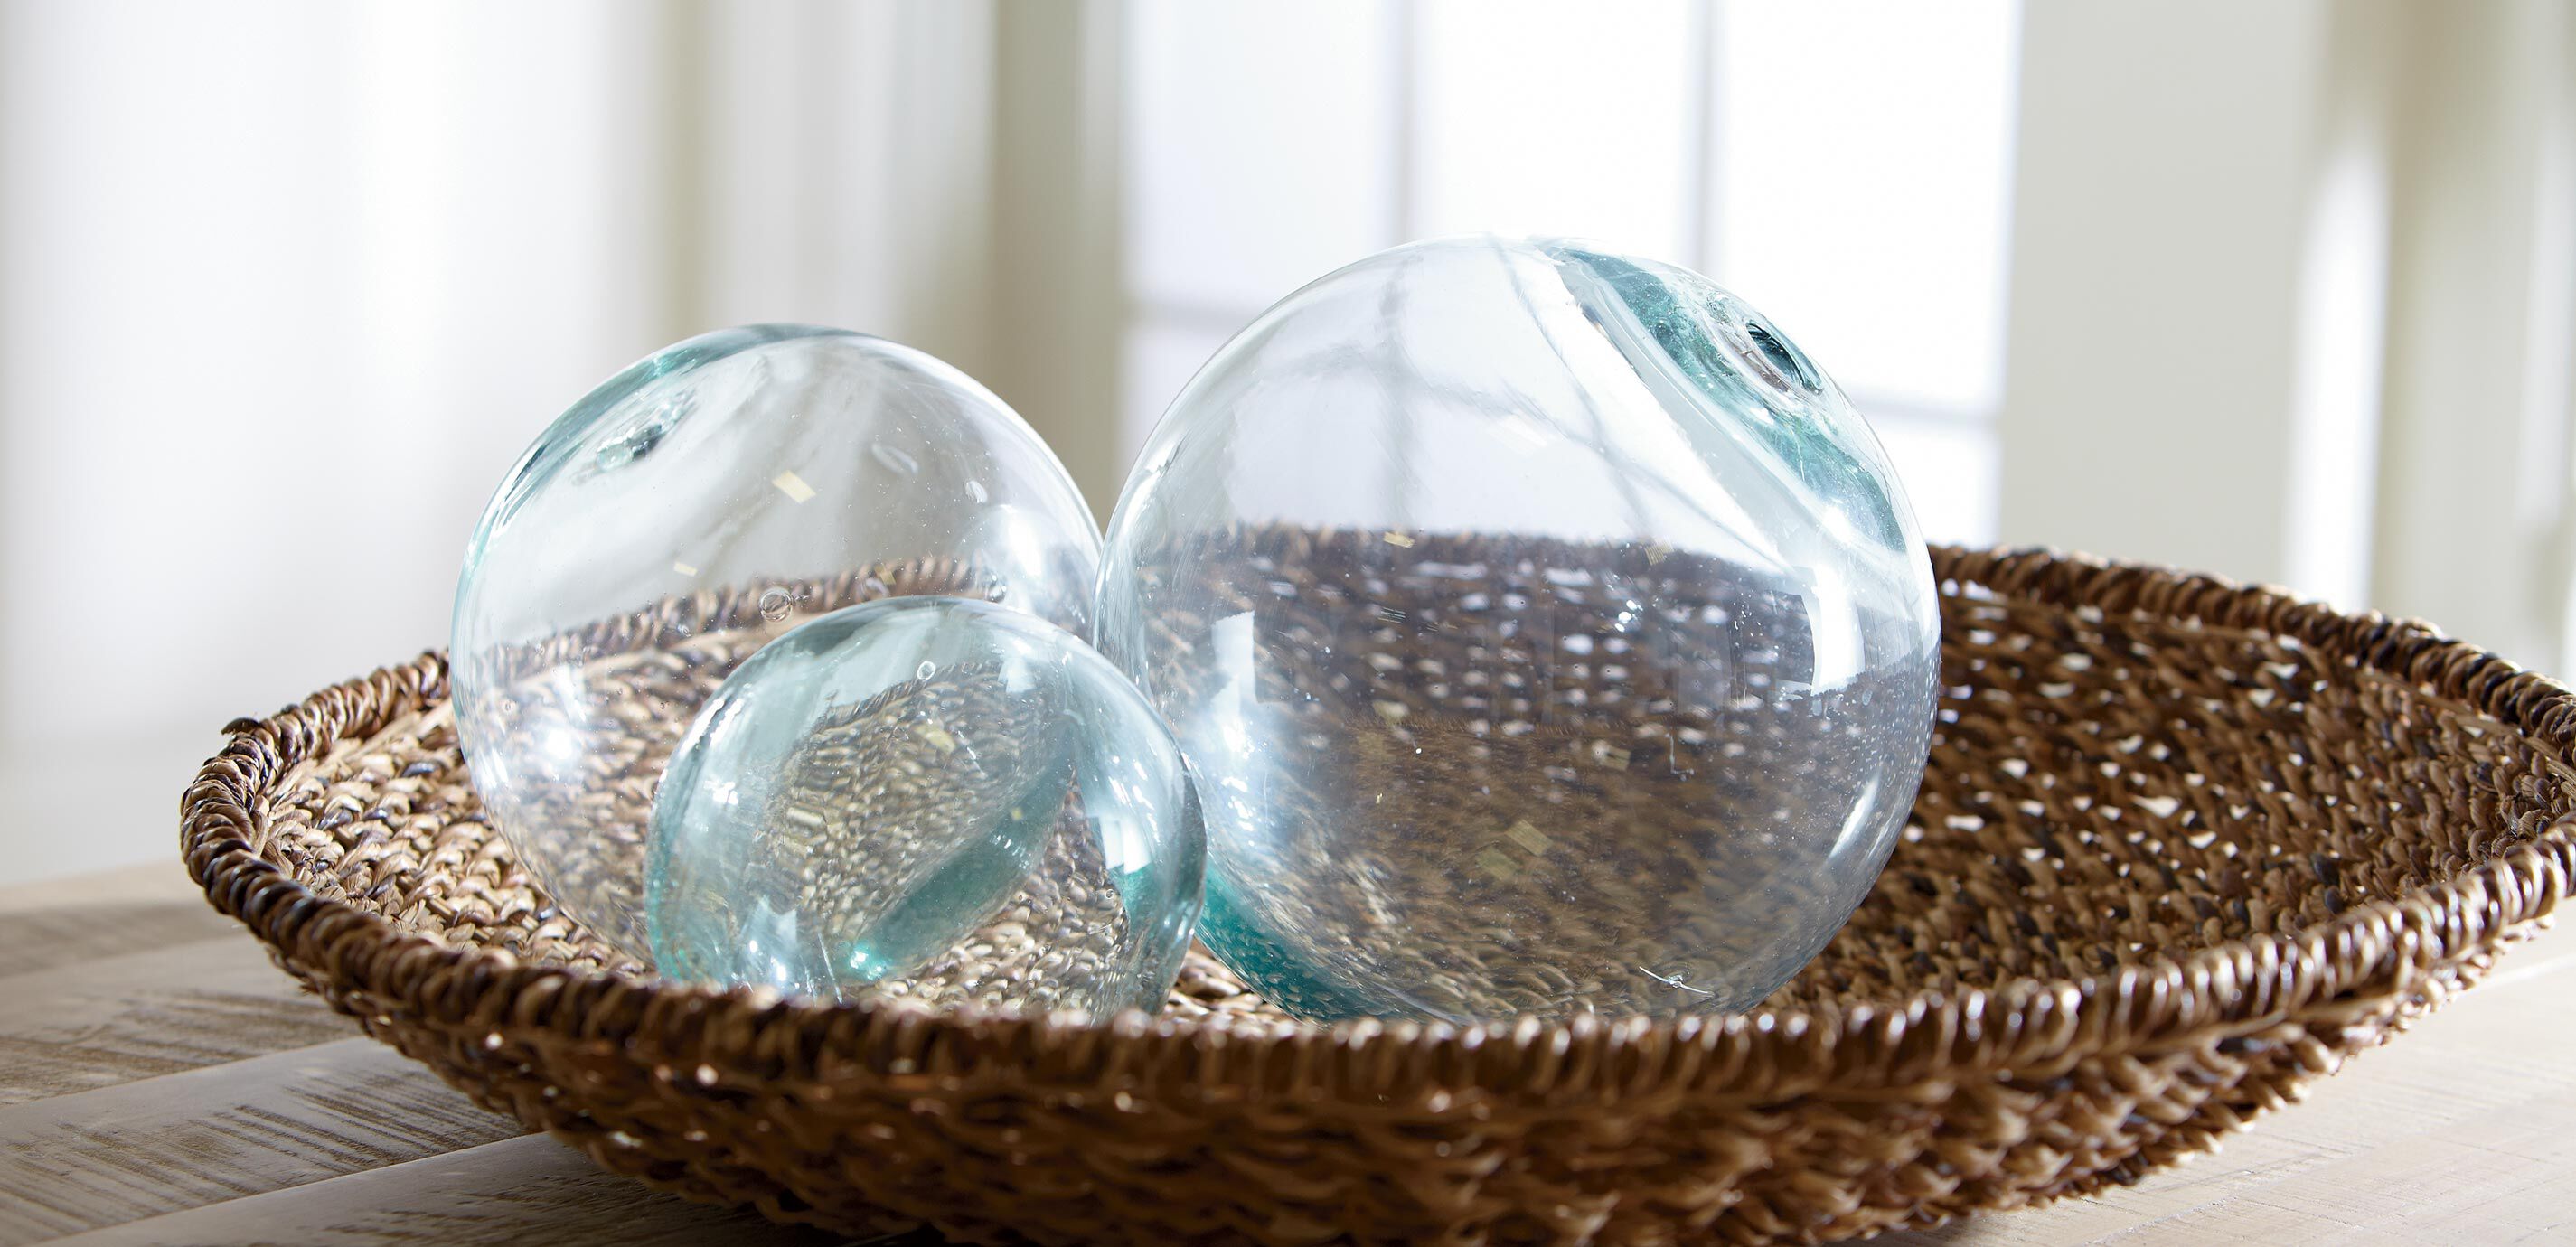 Recycled Glass Balls | Beach house decor, Recycled glass, Glass ball